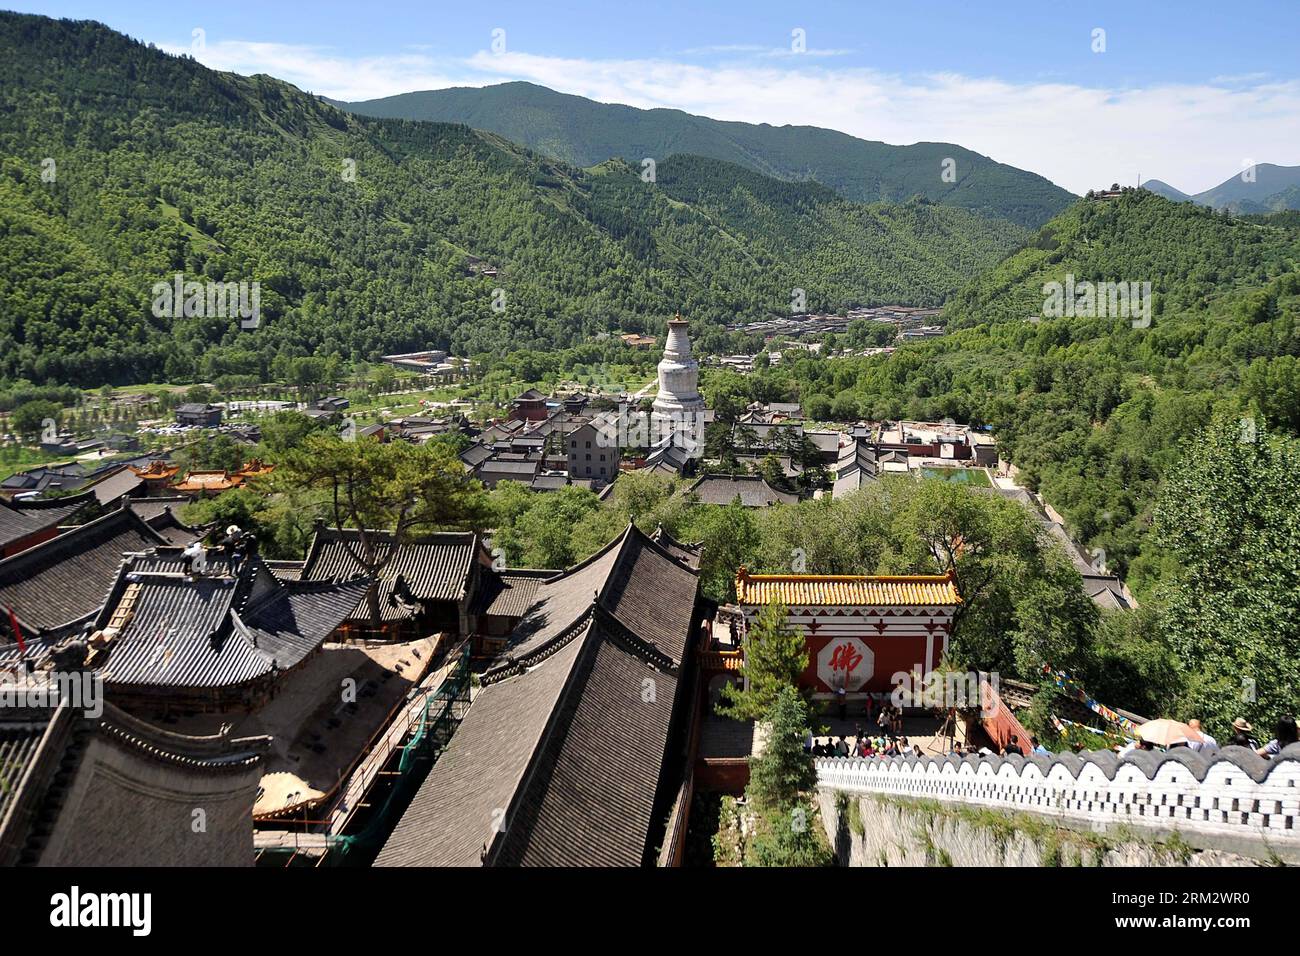 Bildnummer: 59909987  Datum: 26.06.2013  Copyright: imago/Xinhua MOUNT WUTAI, June 26, 2013 - Photo taken on June 26, 2013 shows the temple-dotted Taihuai Town, center of Mount Wutai s scenic area, in north China s Shanxi Province. Mount Wutai is one of four sacred Buddhist mountains in China. Added to UNESCO s World Heritage List in 2009, Mount Wutai is home to about 50 Buddhist temples built between the 1st century AD and the early 20th century. (Xinhua/Zhan Yan) (ry) CHINA-SHANXI-MOUNT WUTAI (CN) PUBLICATIONxNOTxINxCHN Gesellschaft Religion Fotostory xjh x0x 2013 quer     59909987 Date 26 0 Stock Photo